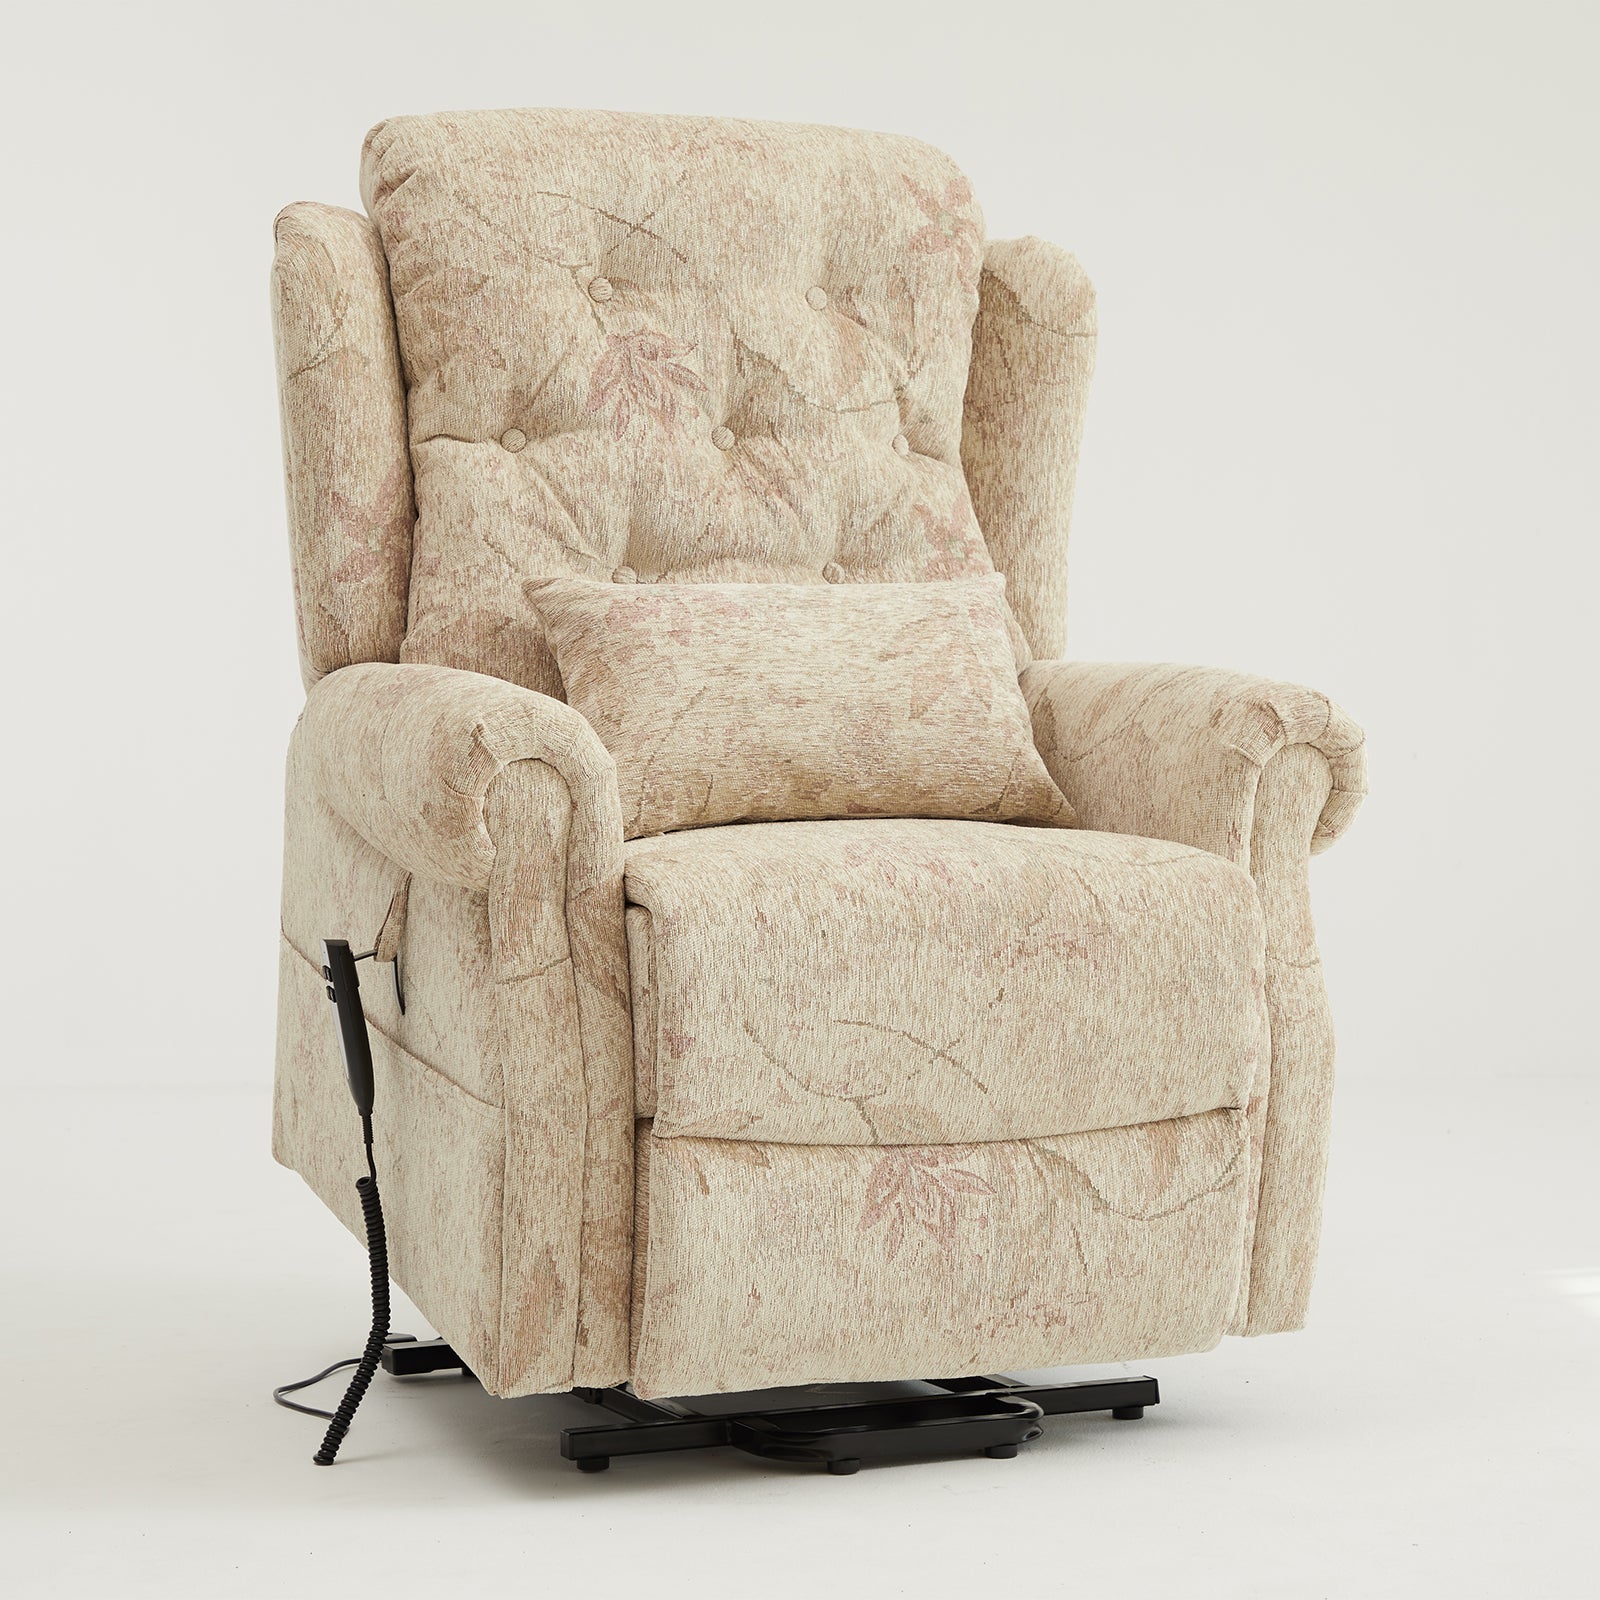 Dual Motor Lift Chair Recliner With Infinite Positions(Lay Flat)